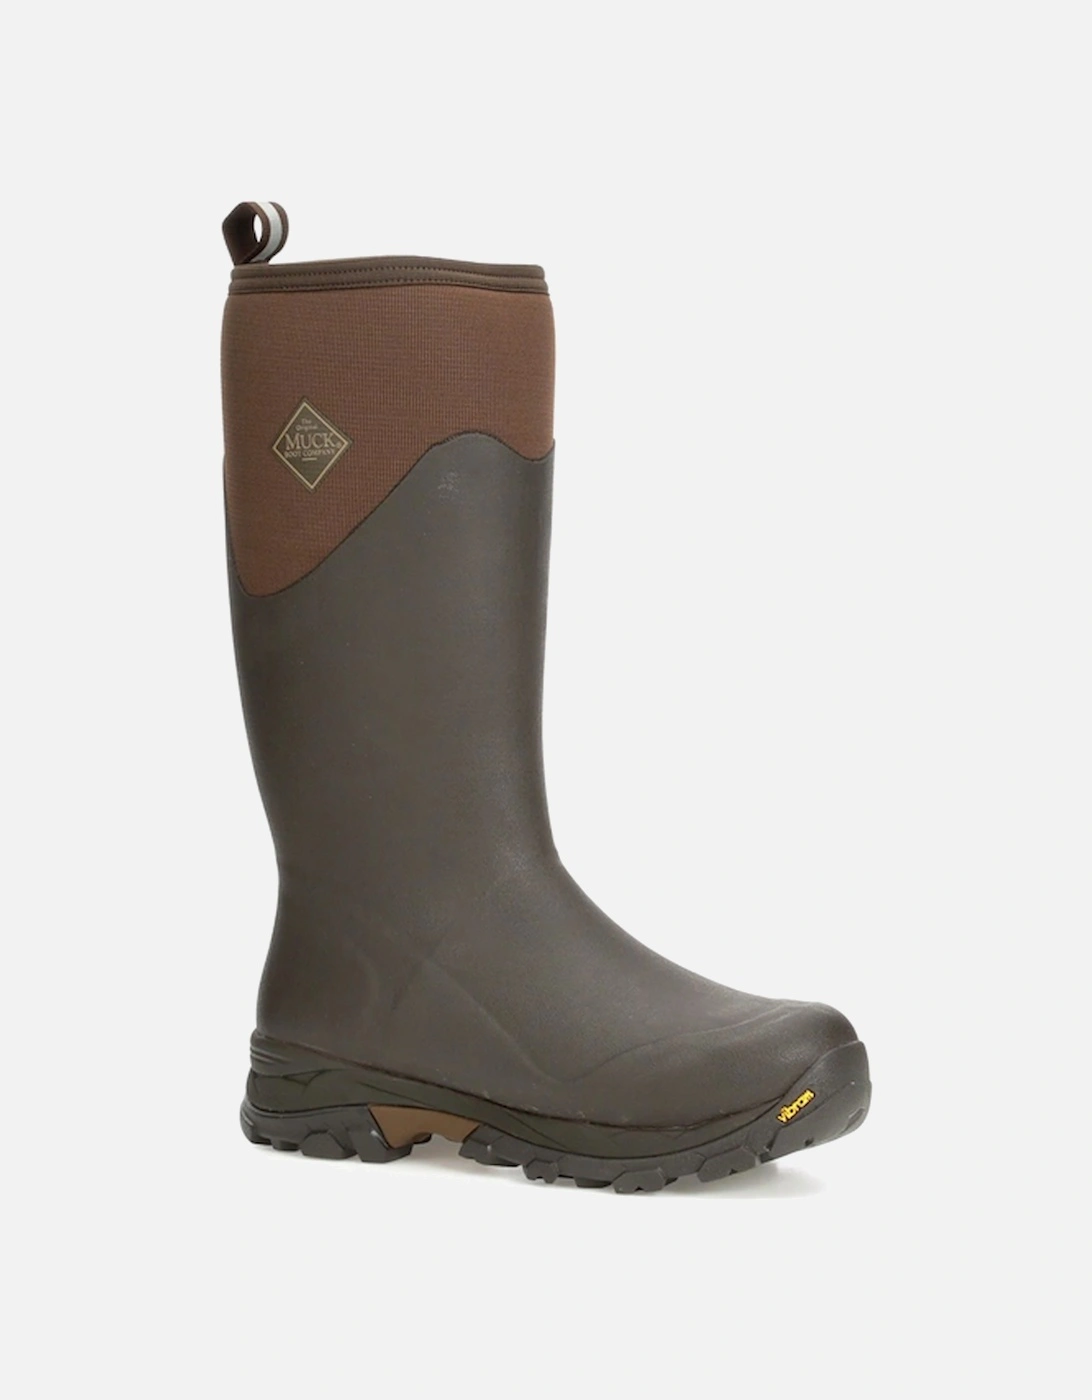 Muck Boots Men's Arctic Ice Tall Wellies Brown DFS